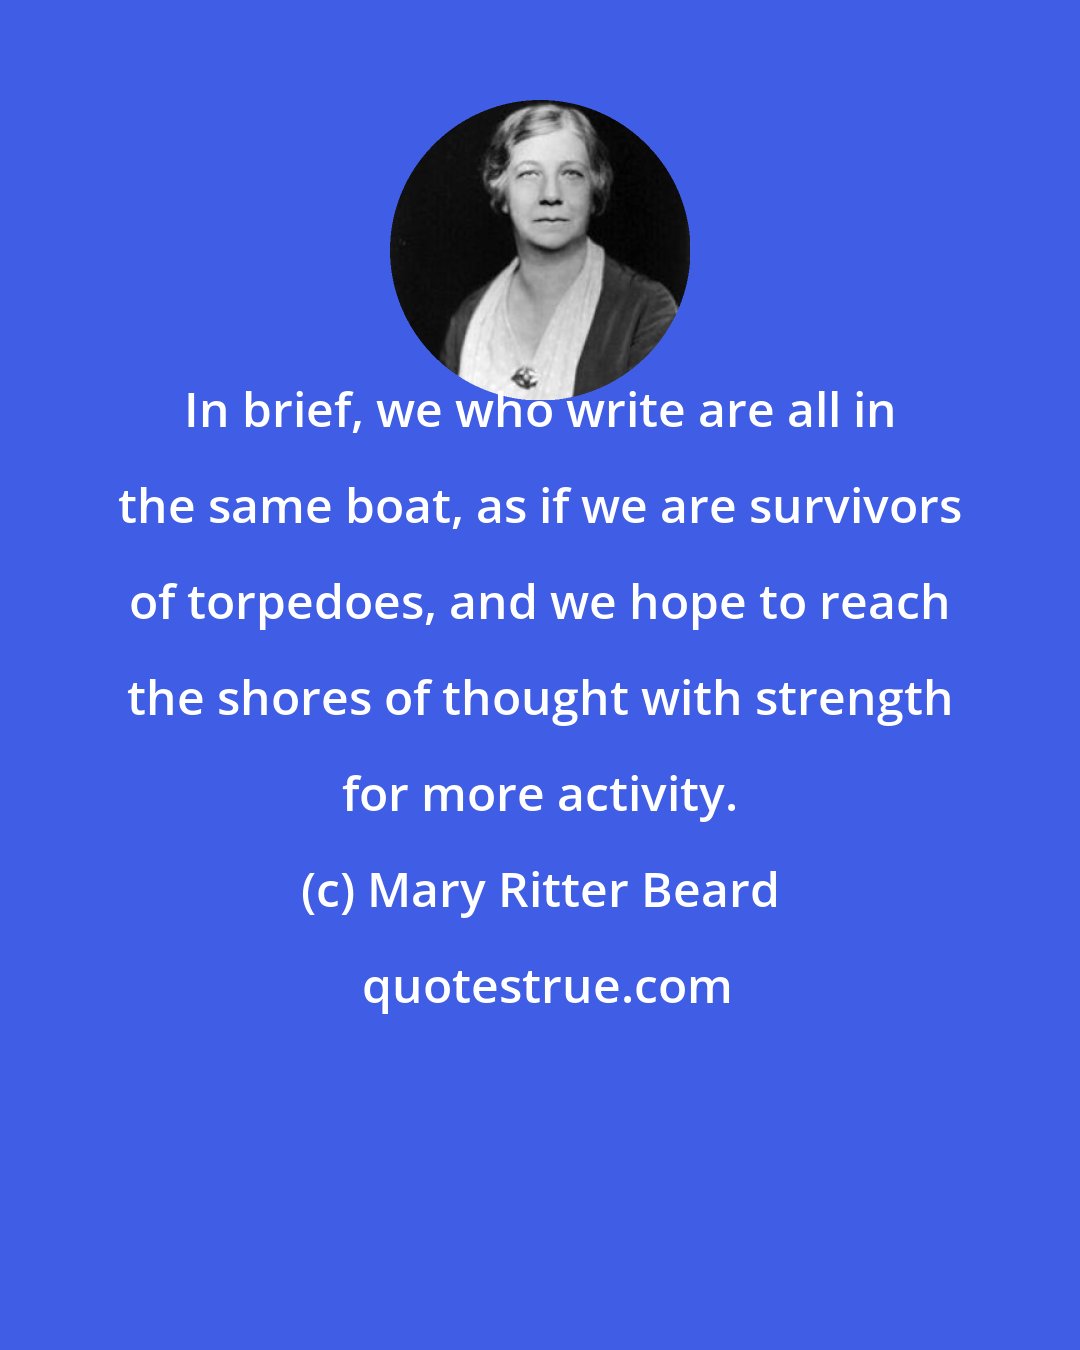 Mary Ritter Beard: In brief, we who write are all in the same boat, as if we are survivors of torpedoes, and we hope to reach the shores of thought with strength for more activity.